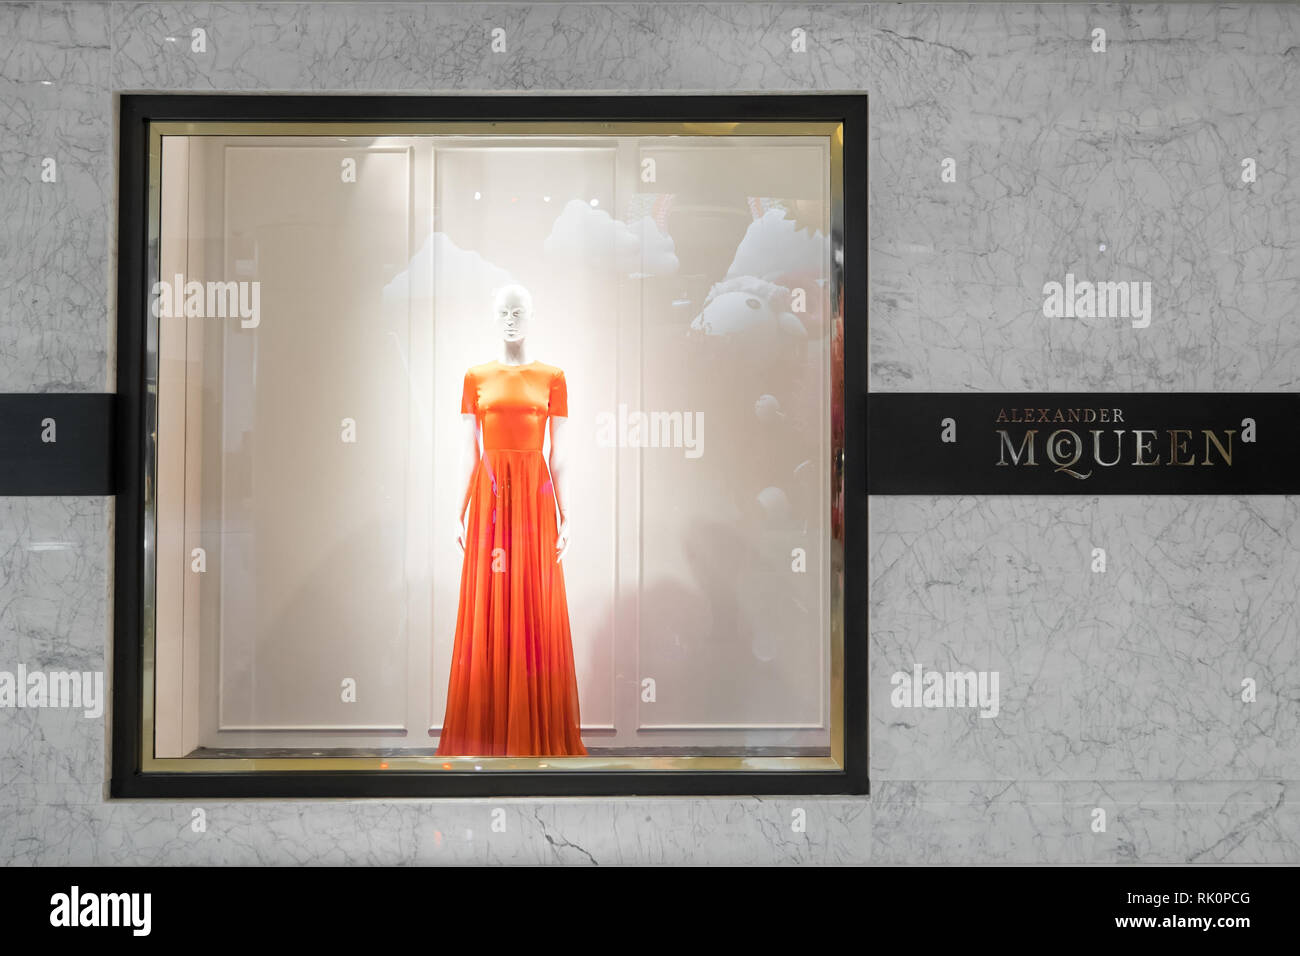 HONG KONG - 23 JAN, 2015: Alexander Mcqueen fashion boutique display window with mannequin dressed in haute couture luxury red female dress Stock Photo